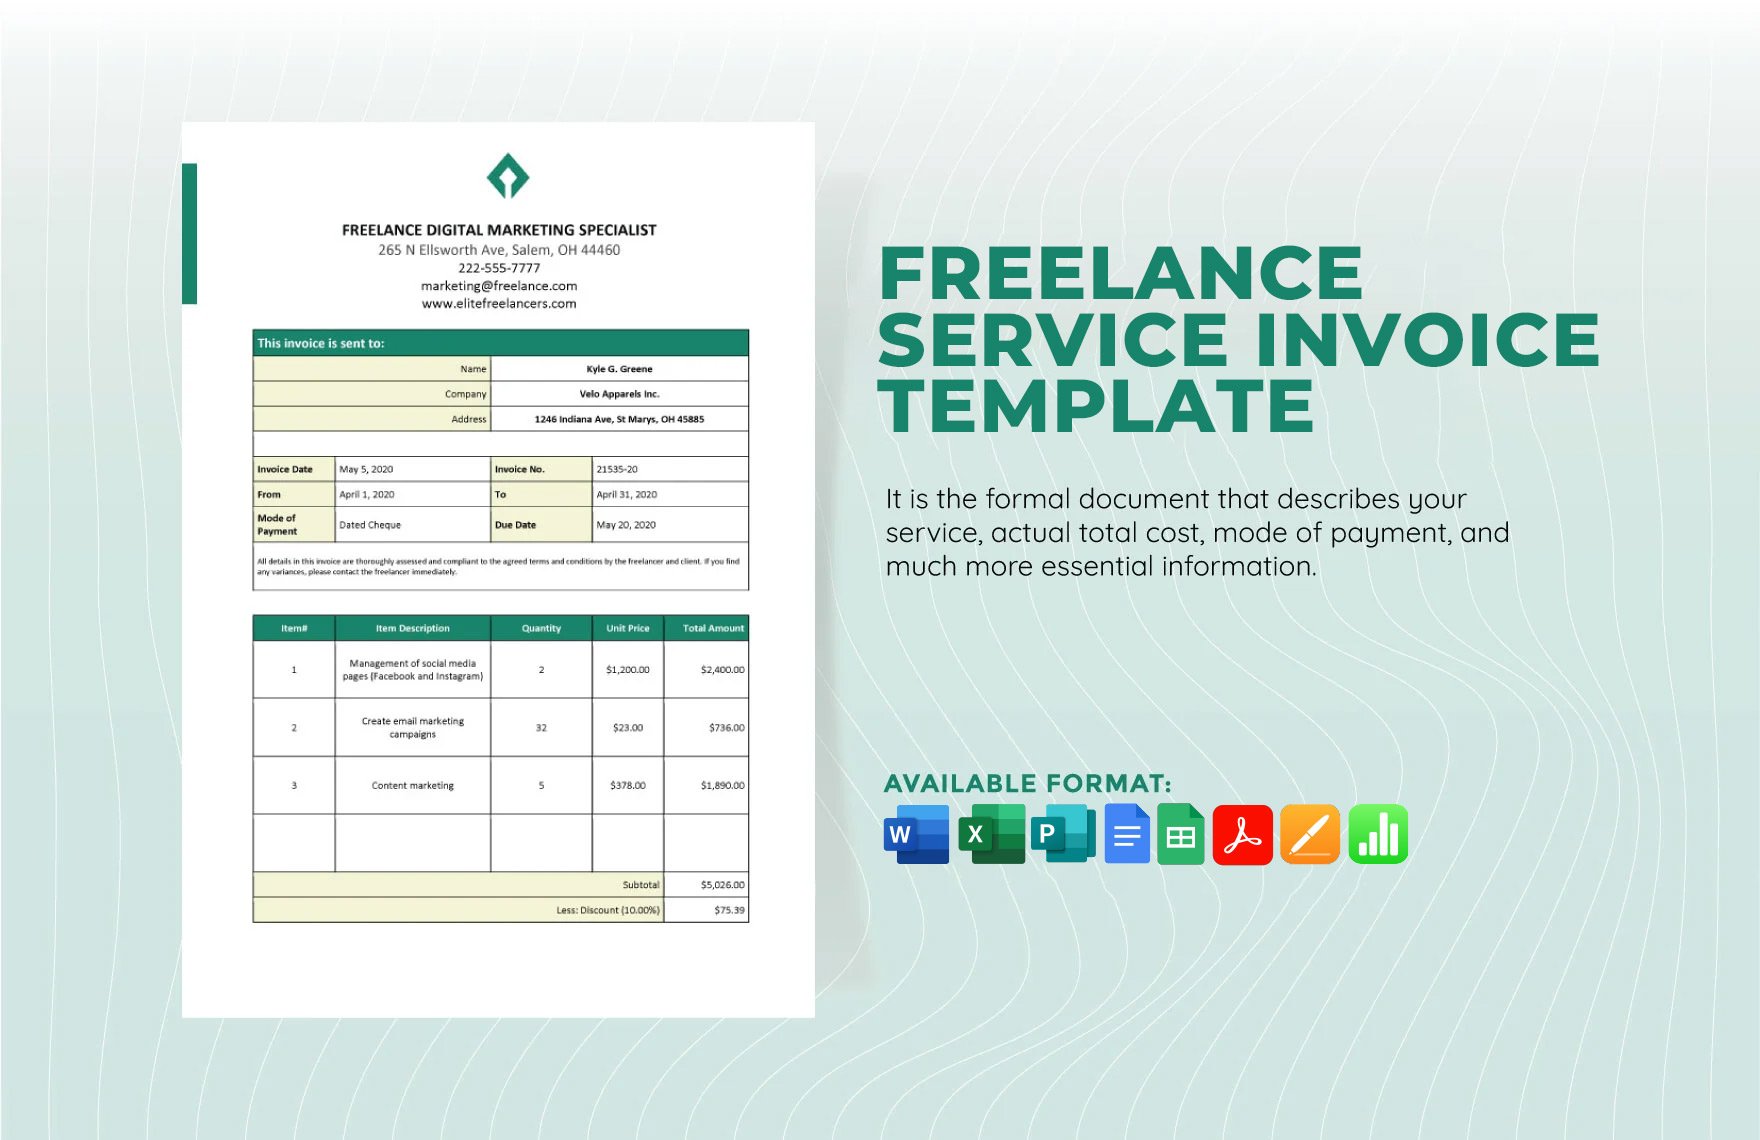 Freelance Service Invoice Template in Word, Google Docs, Excel, PDF, Google Sheets, Apple Pages, Publisher, Apple Numbers